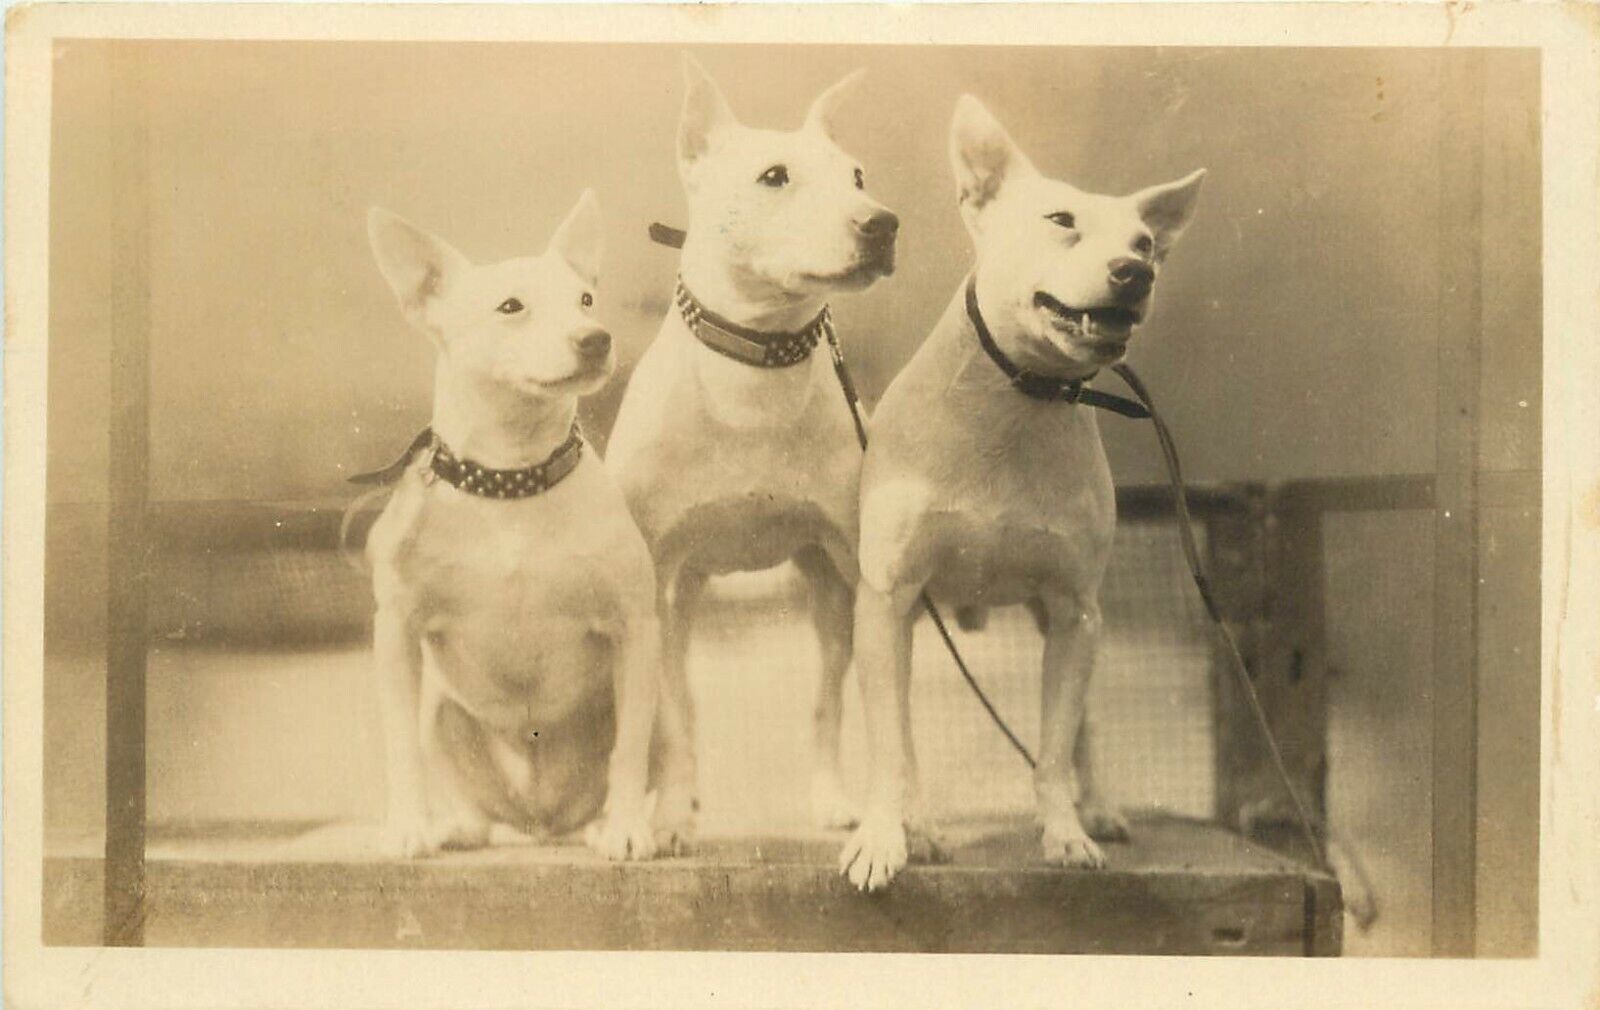 1920s RPPC 3 White Bull Terriers Dog Food Advertising Old Grist Mill Dog Bread